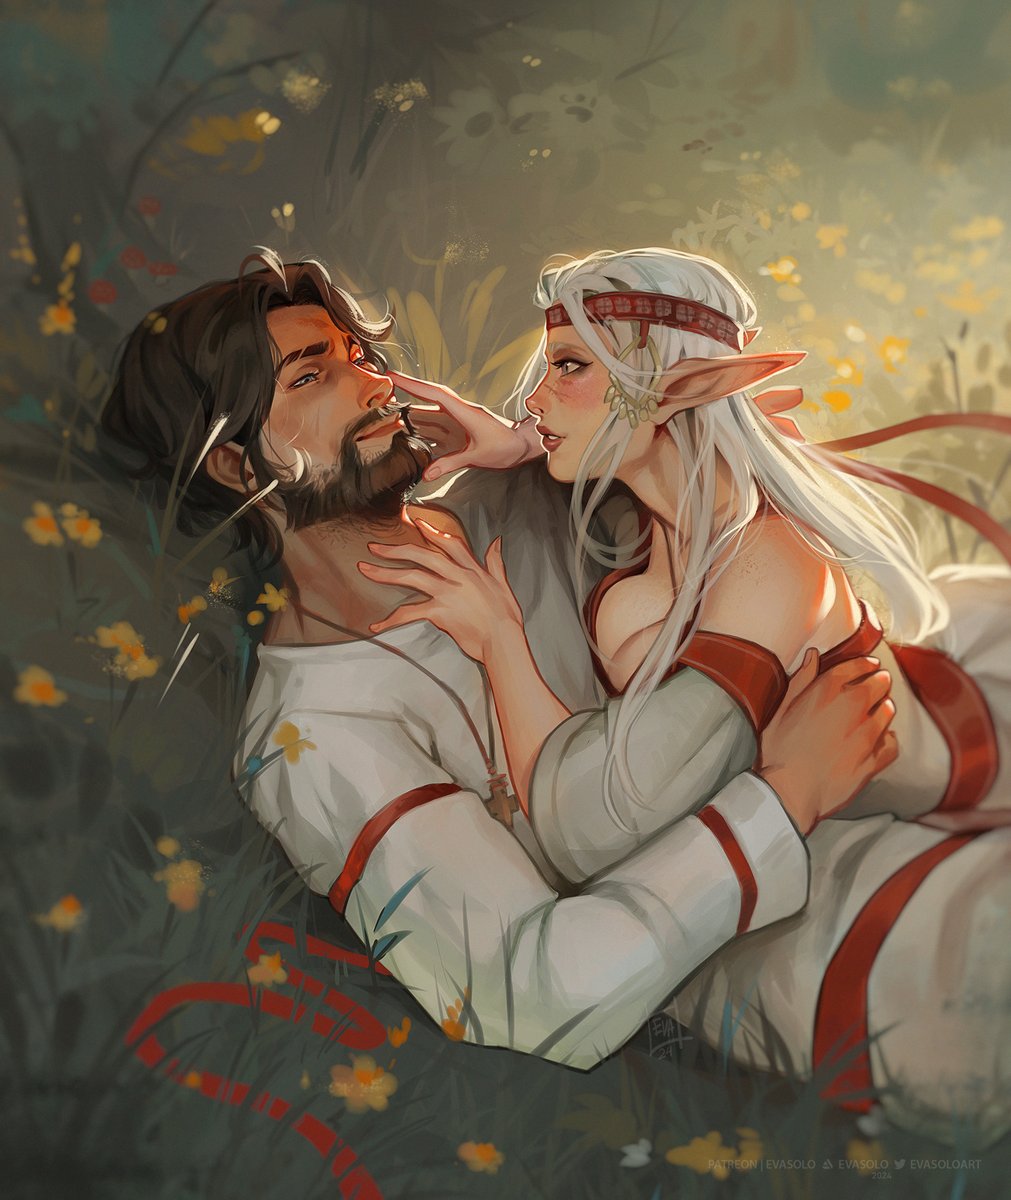 Asya and Voymir for @griboedo4ka as a part of secret valentine art trade! Happy val day for everyone)